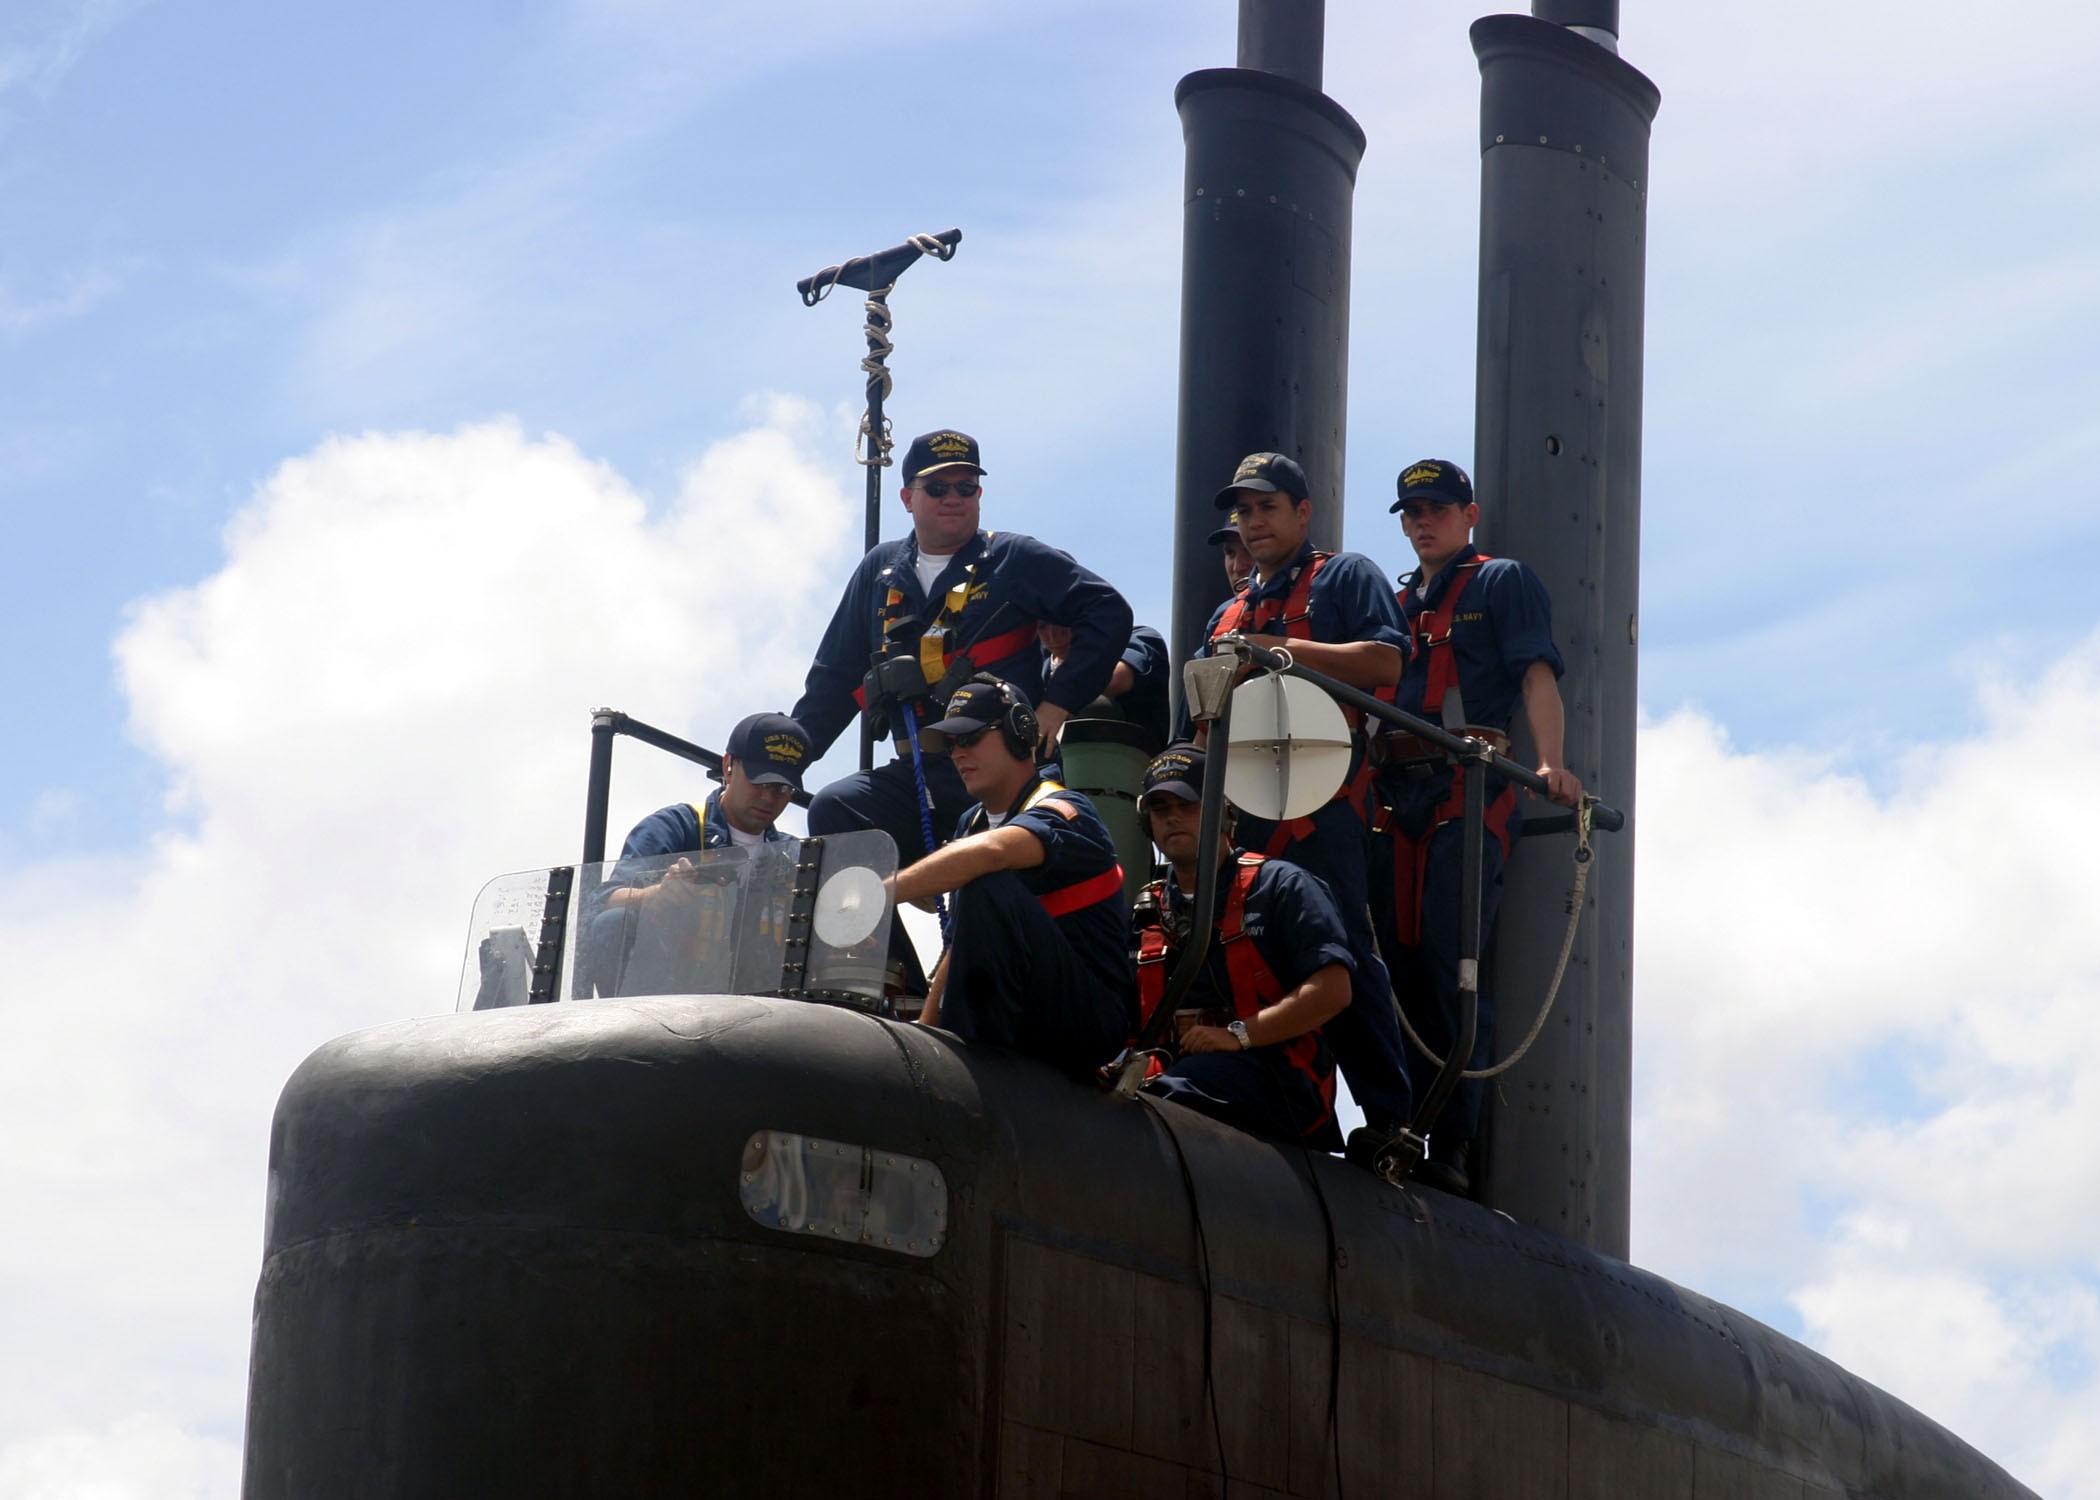 US Navy 040520-N-5539C-001 Commanding Officer Cmdr. James Pitts, center, USS Tucson (SSN 770), and members of this navigation detail man the boat's sail